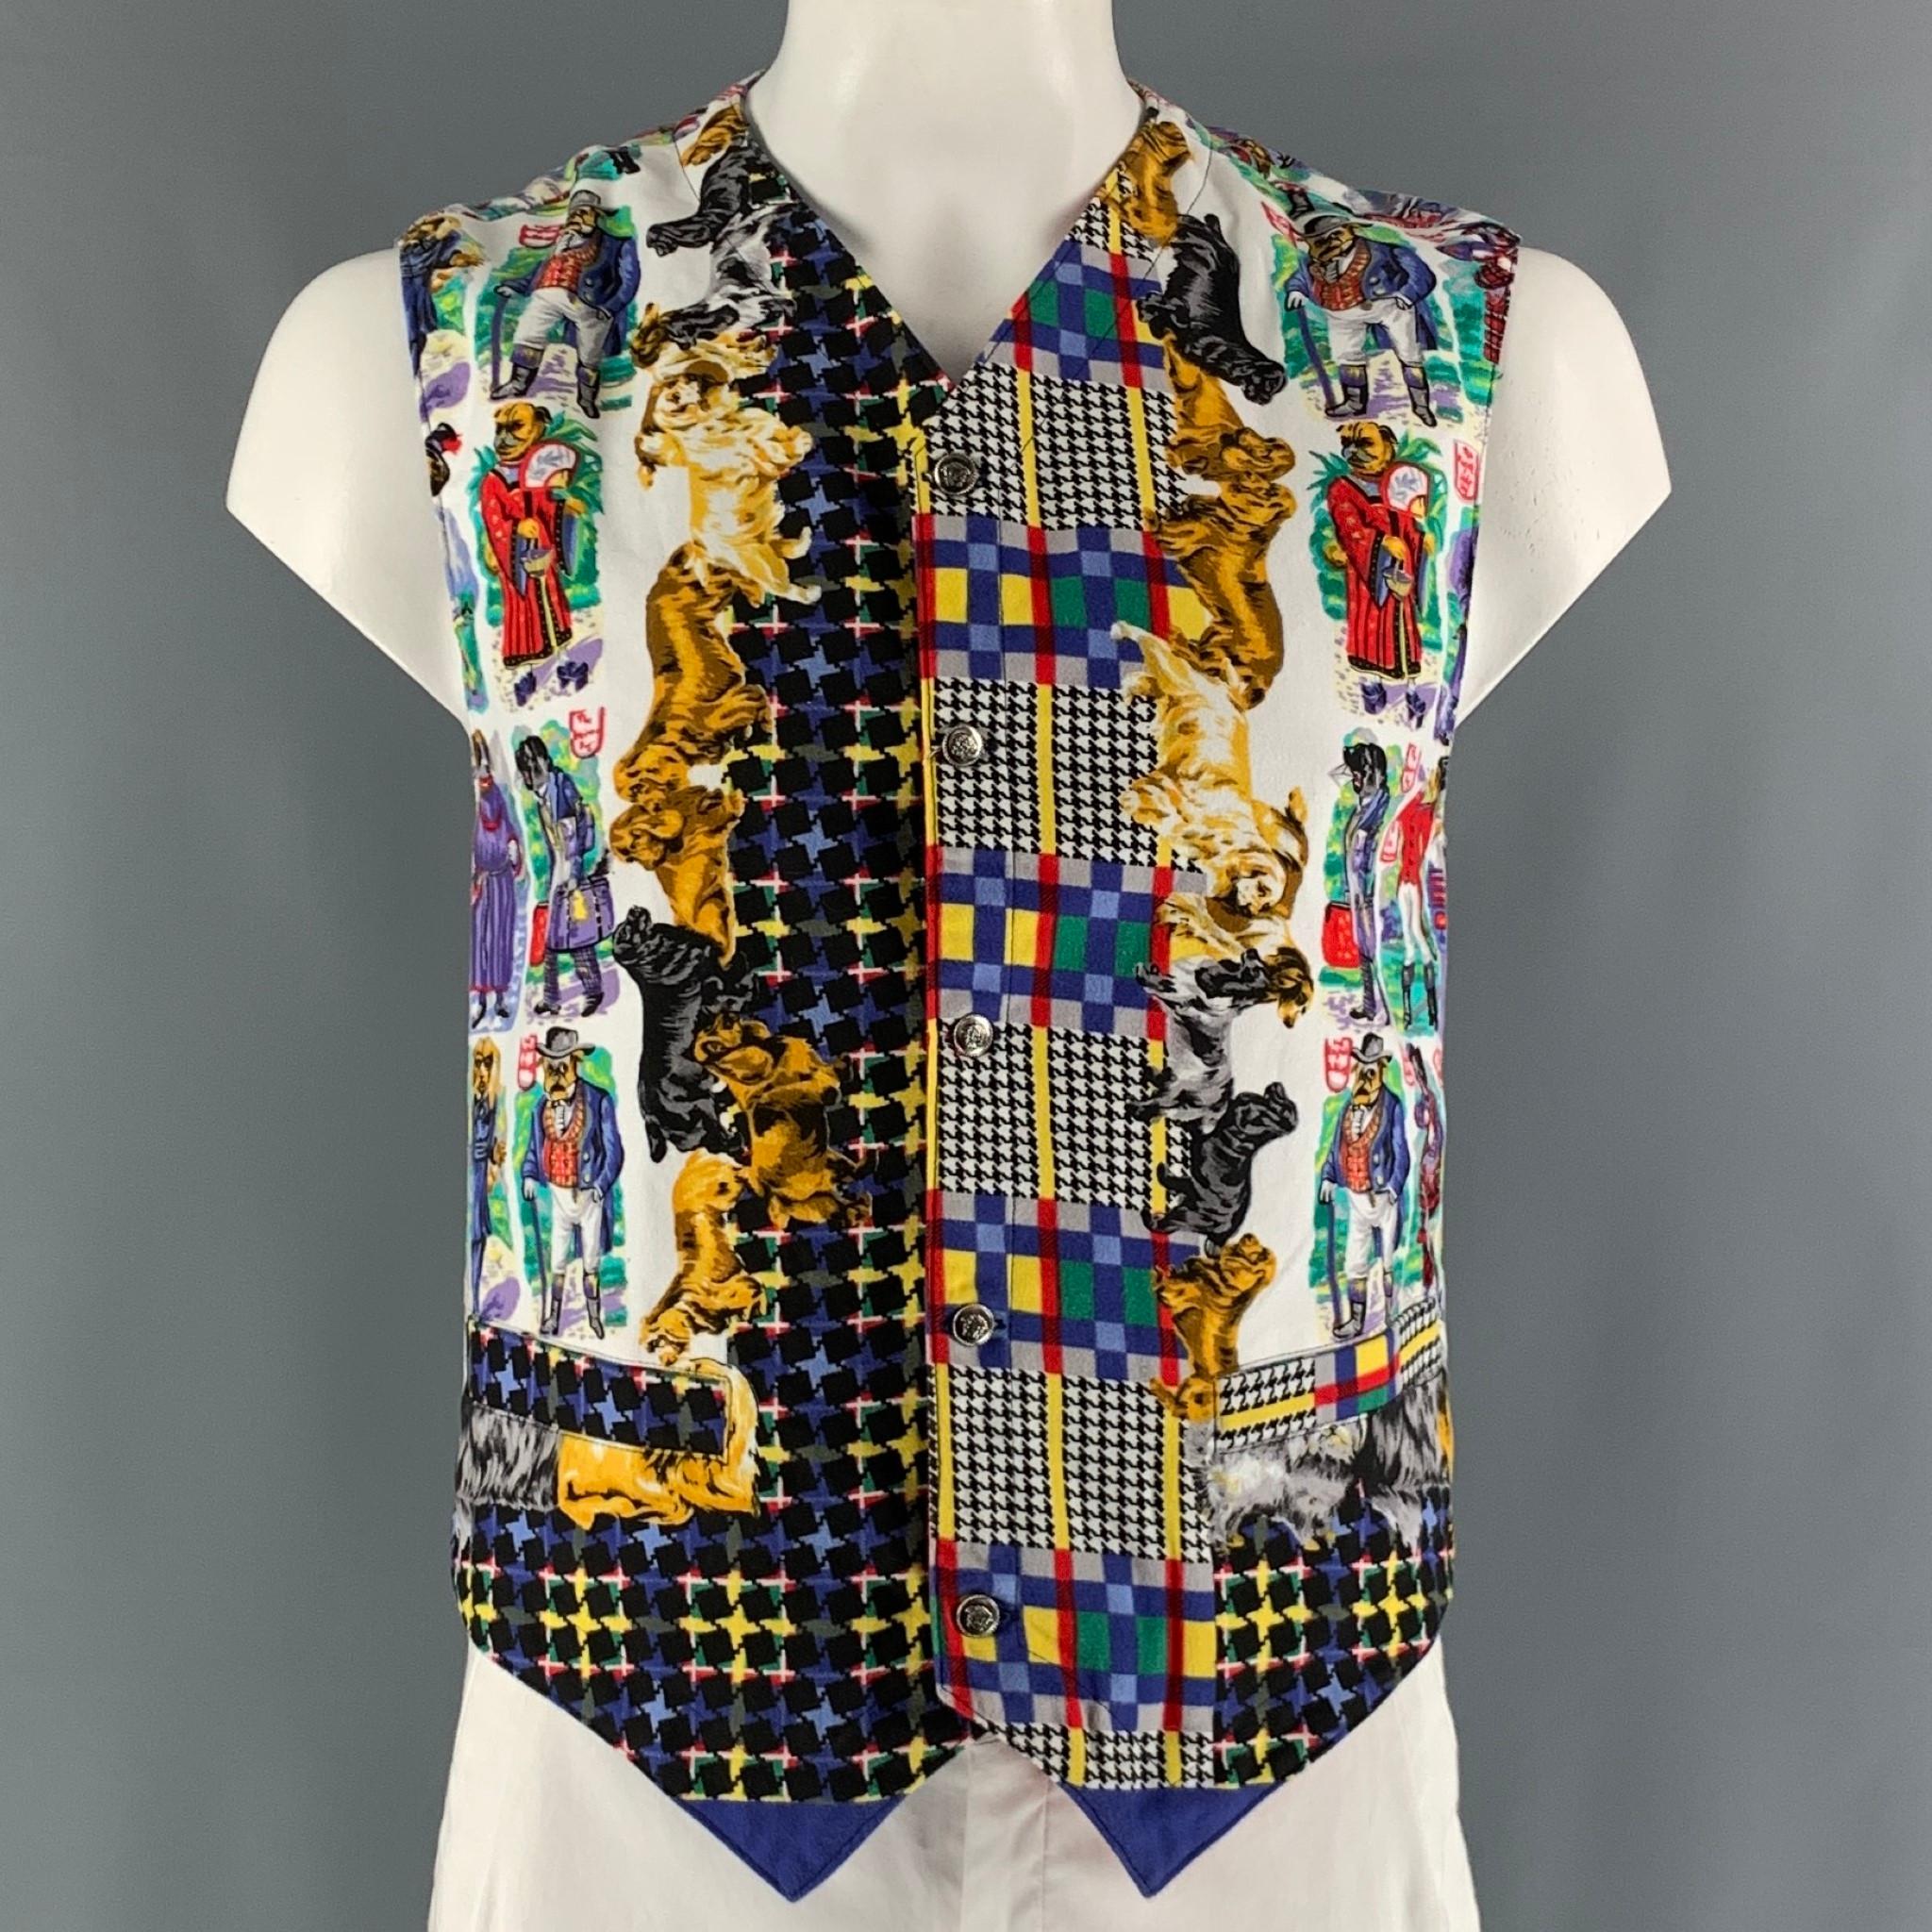 VERSACE JEANS COUTURE vest comes in a black, red and white multi-colour cotton woven material featuring dogs motif, slit pockets, silver medusa buttons, and a buttoned closure. Made in Italy.

Very Good Pre-Owned Condition.
Marked: